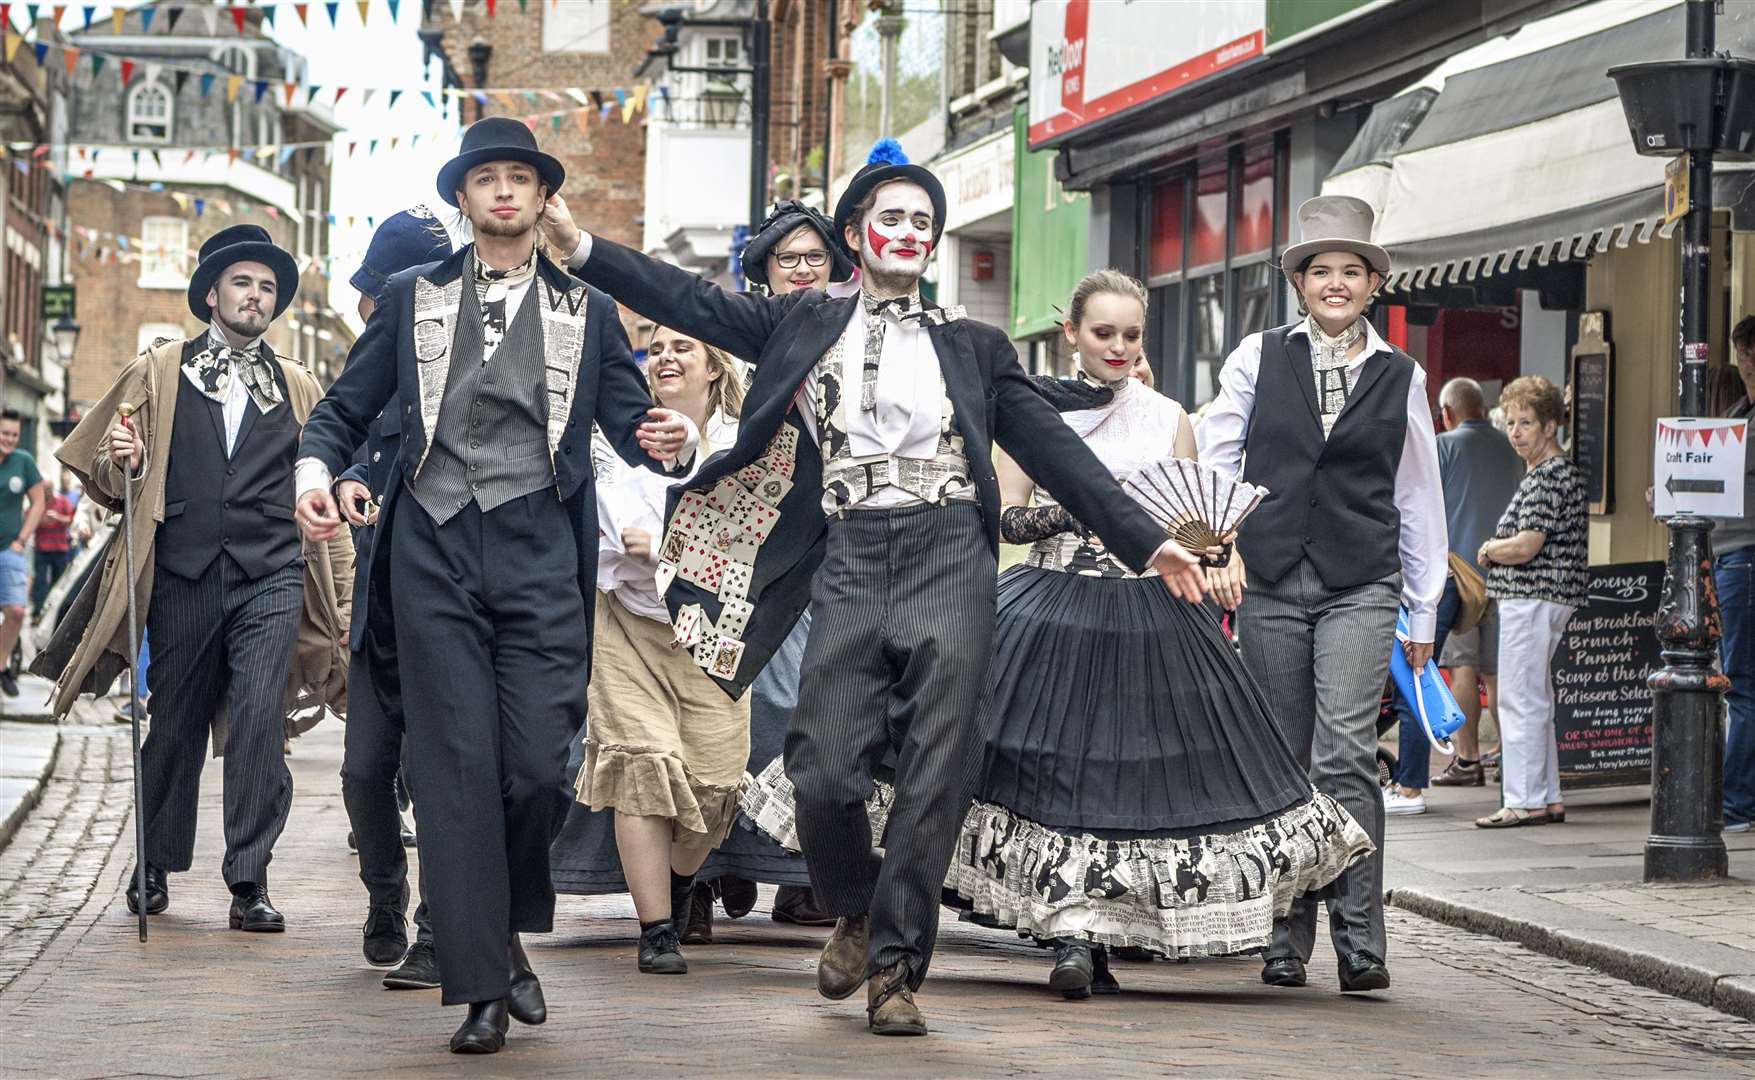 Dickensian characters parade through the streets